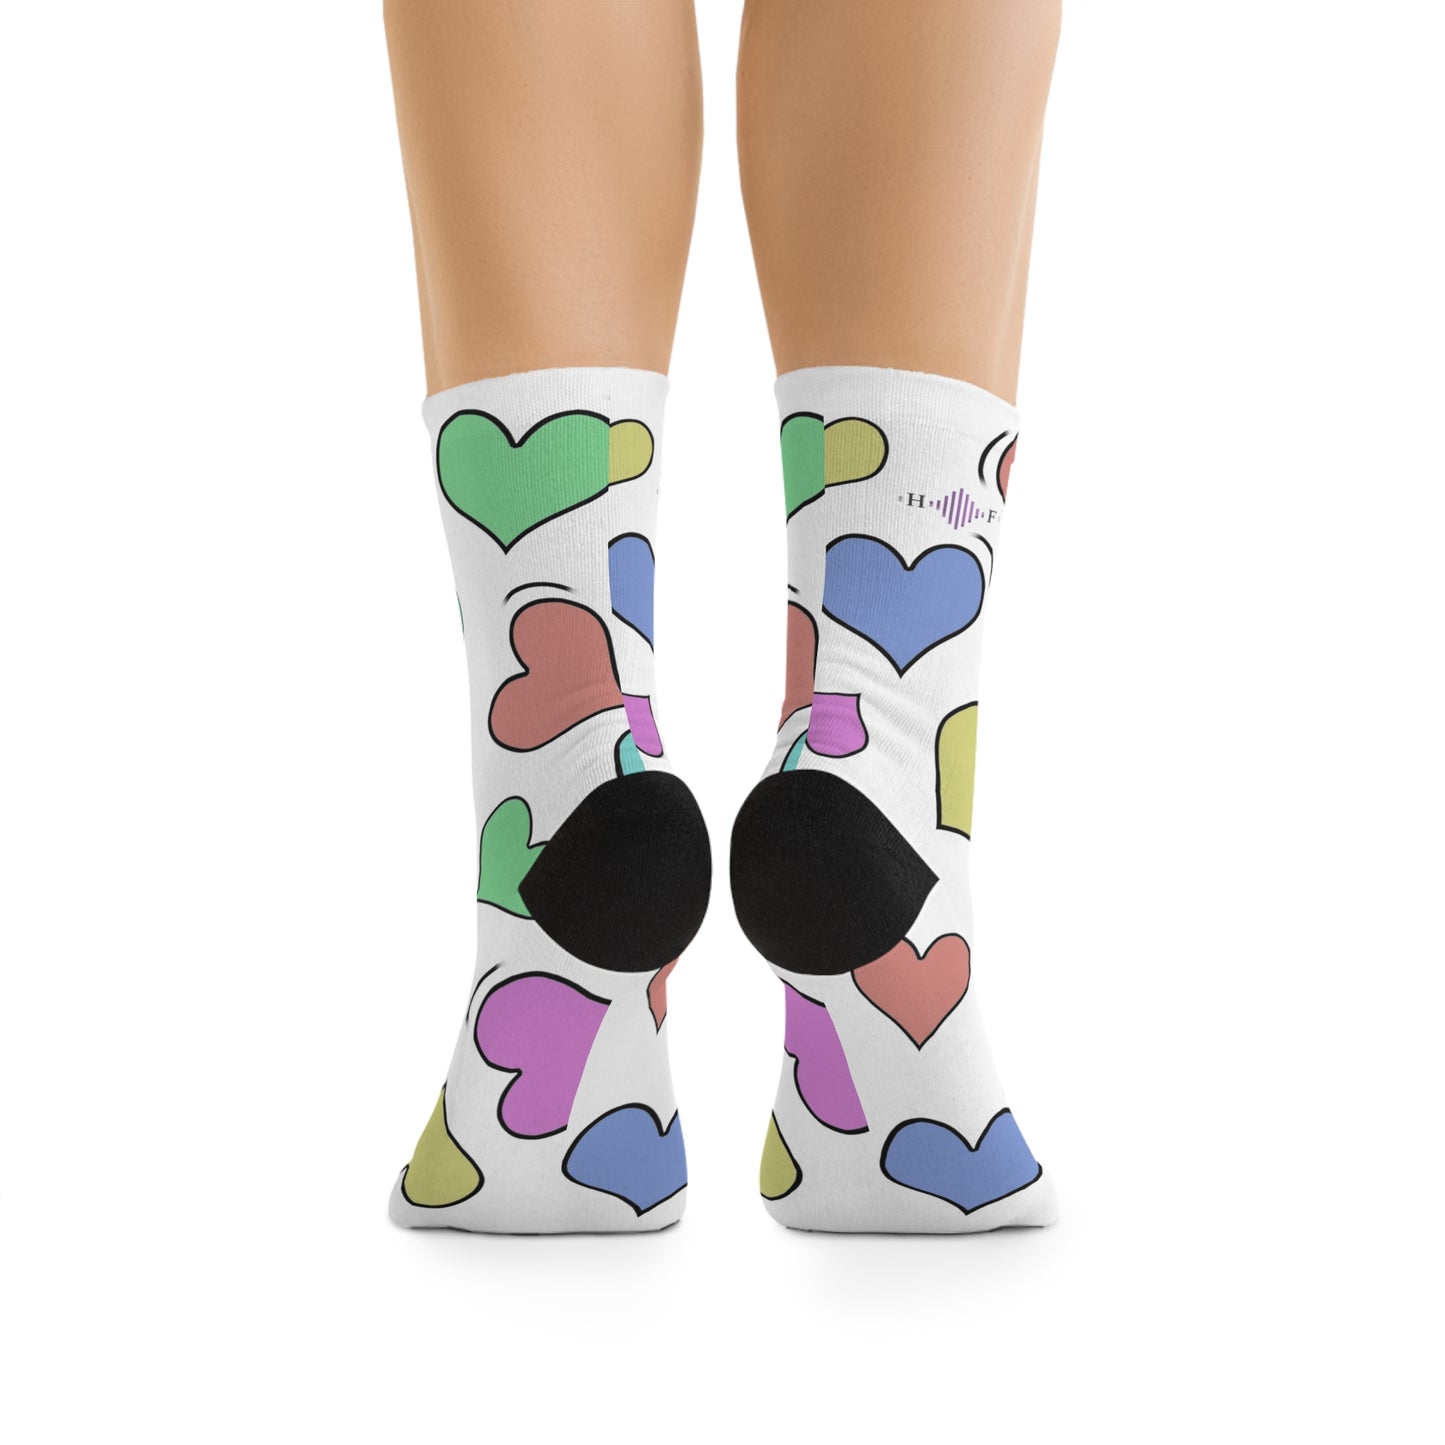 Sweetie Hearts - Recycled Poly Socks